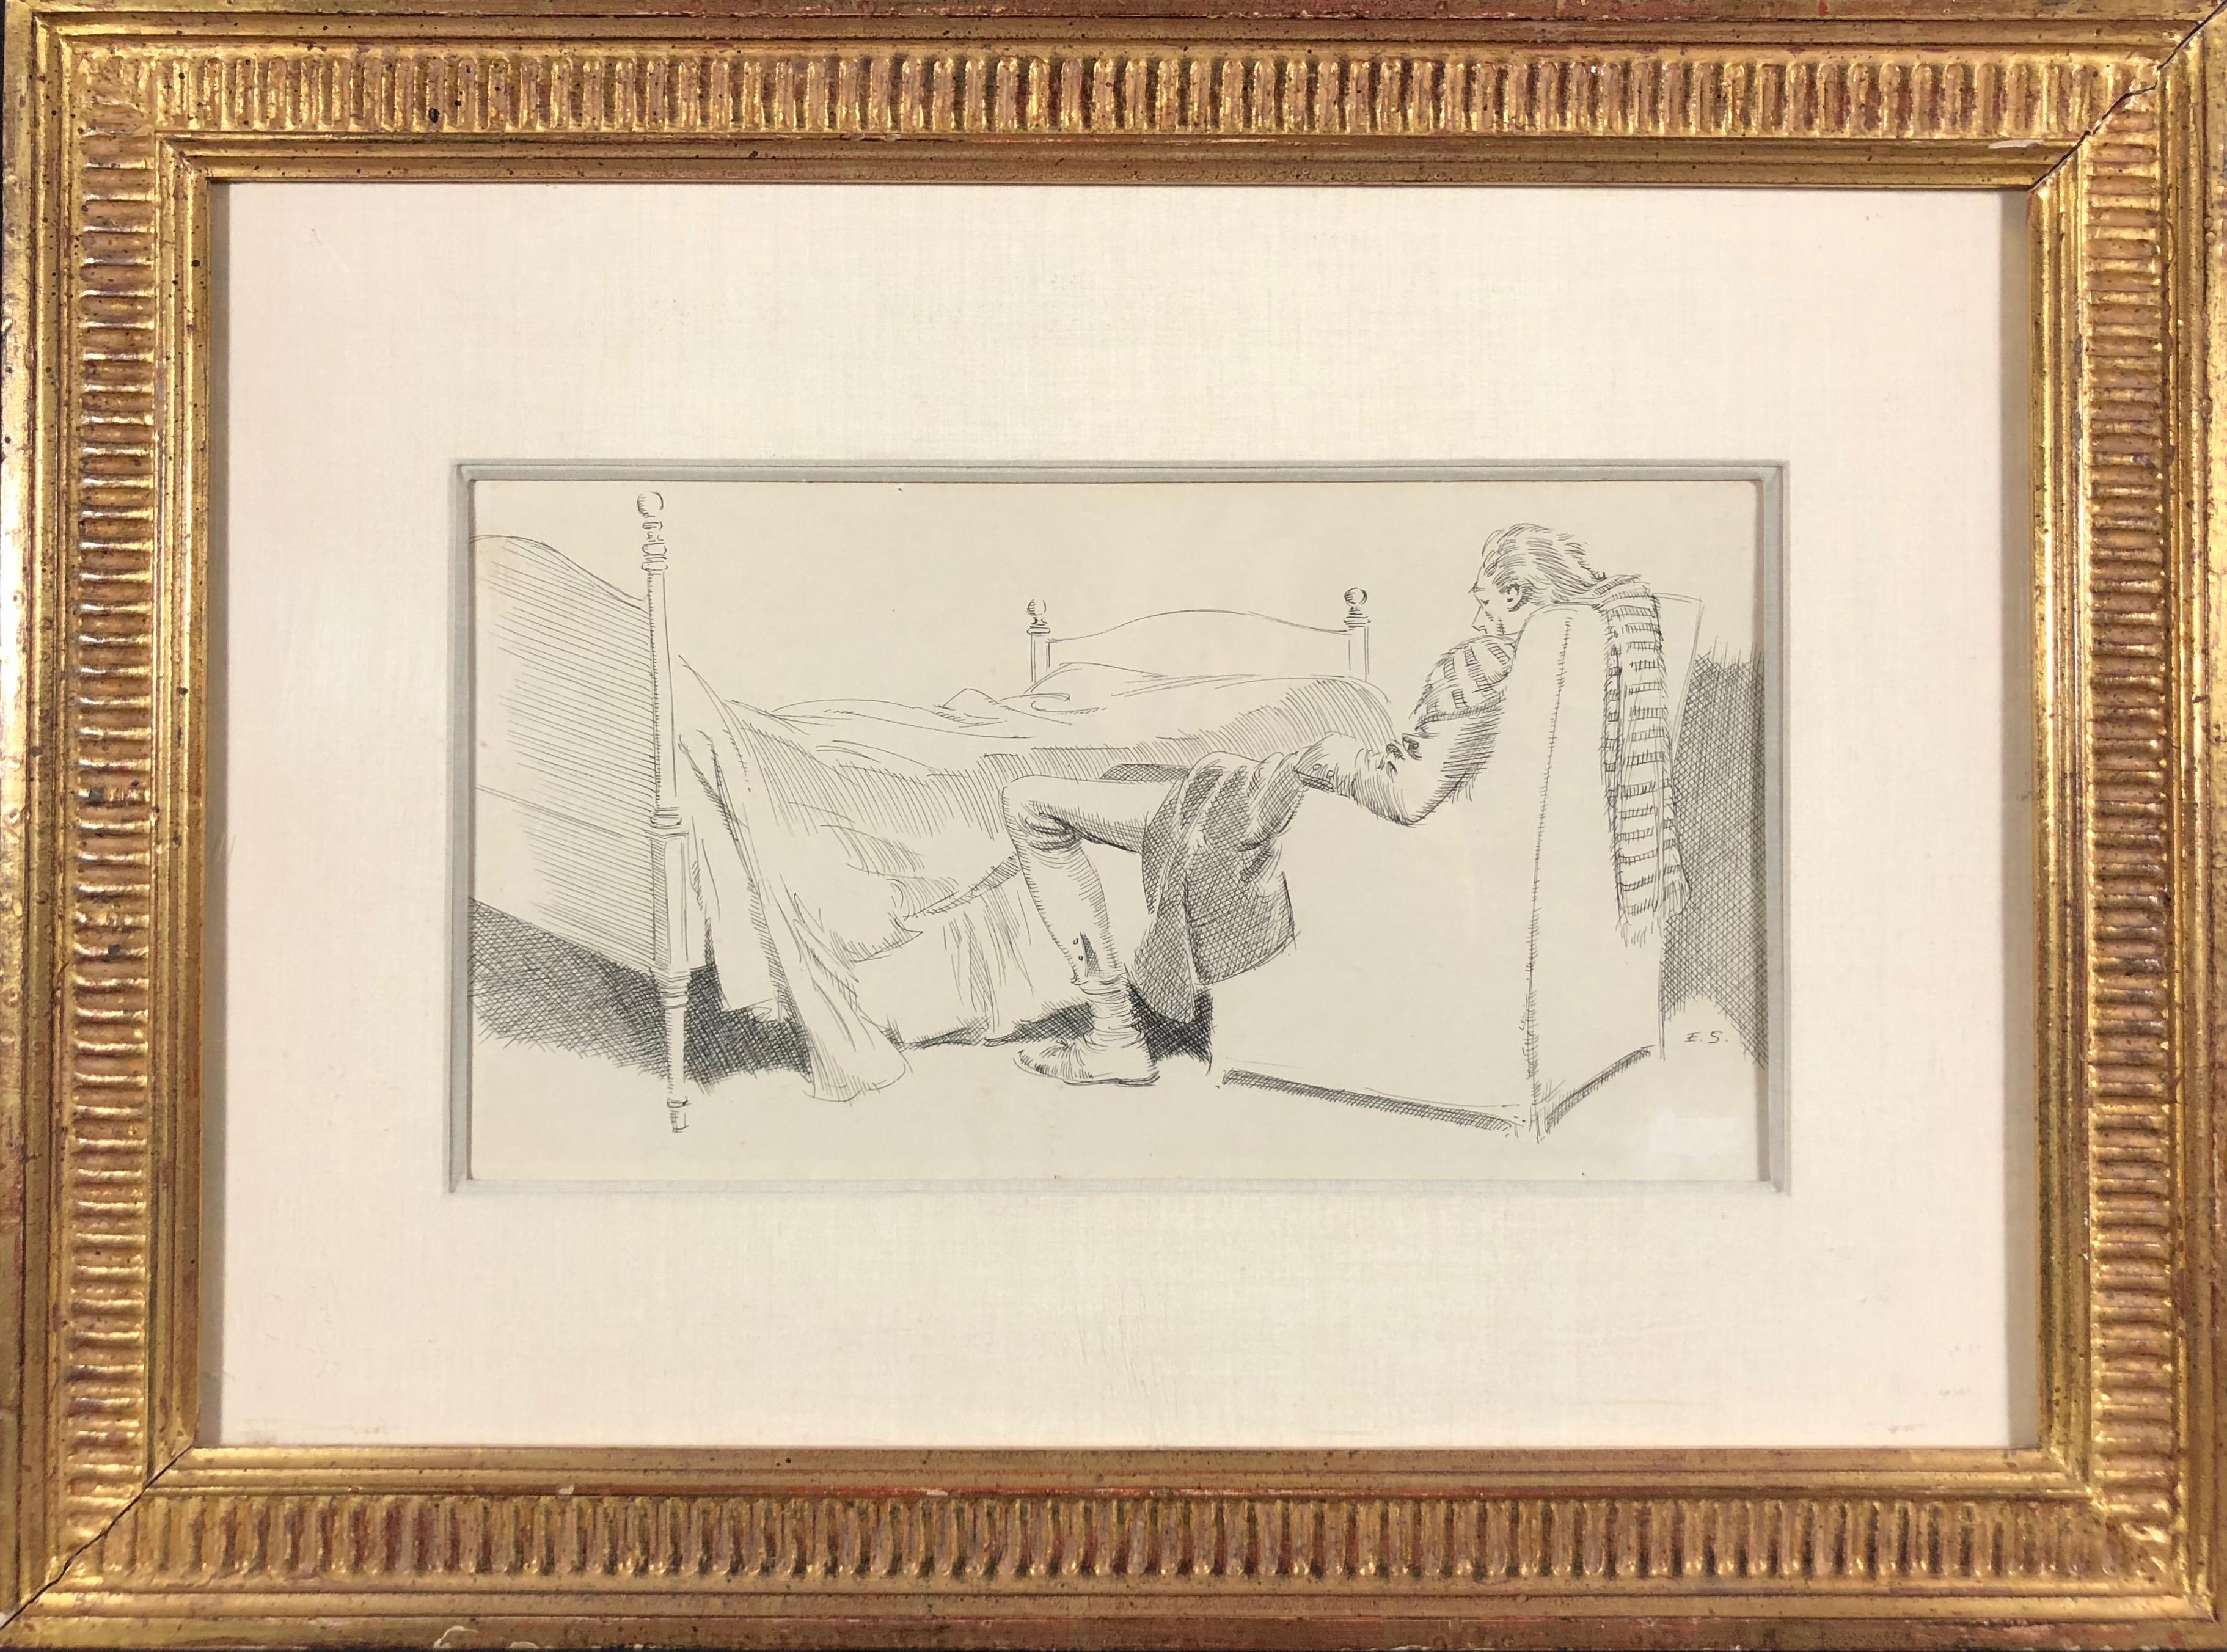 Gentleman Napping in a Chair (Possibly for Ichabod Crane or other Illustration)